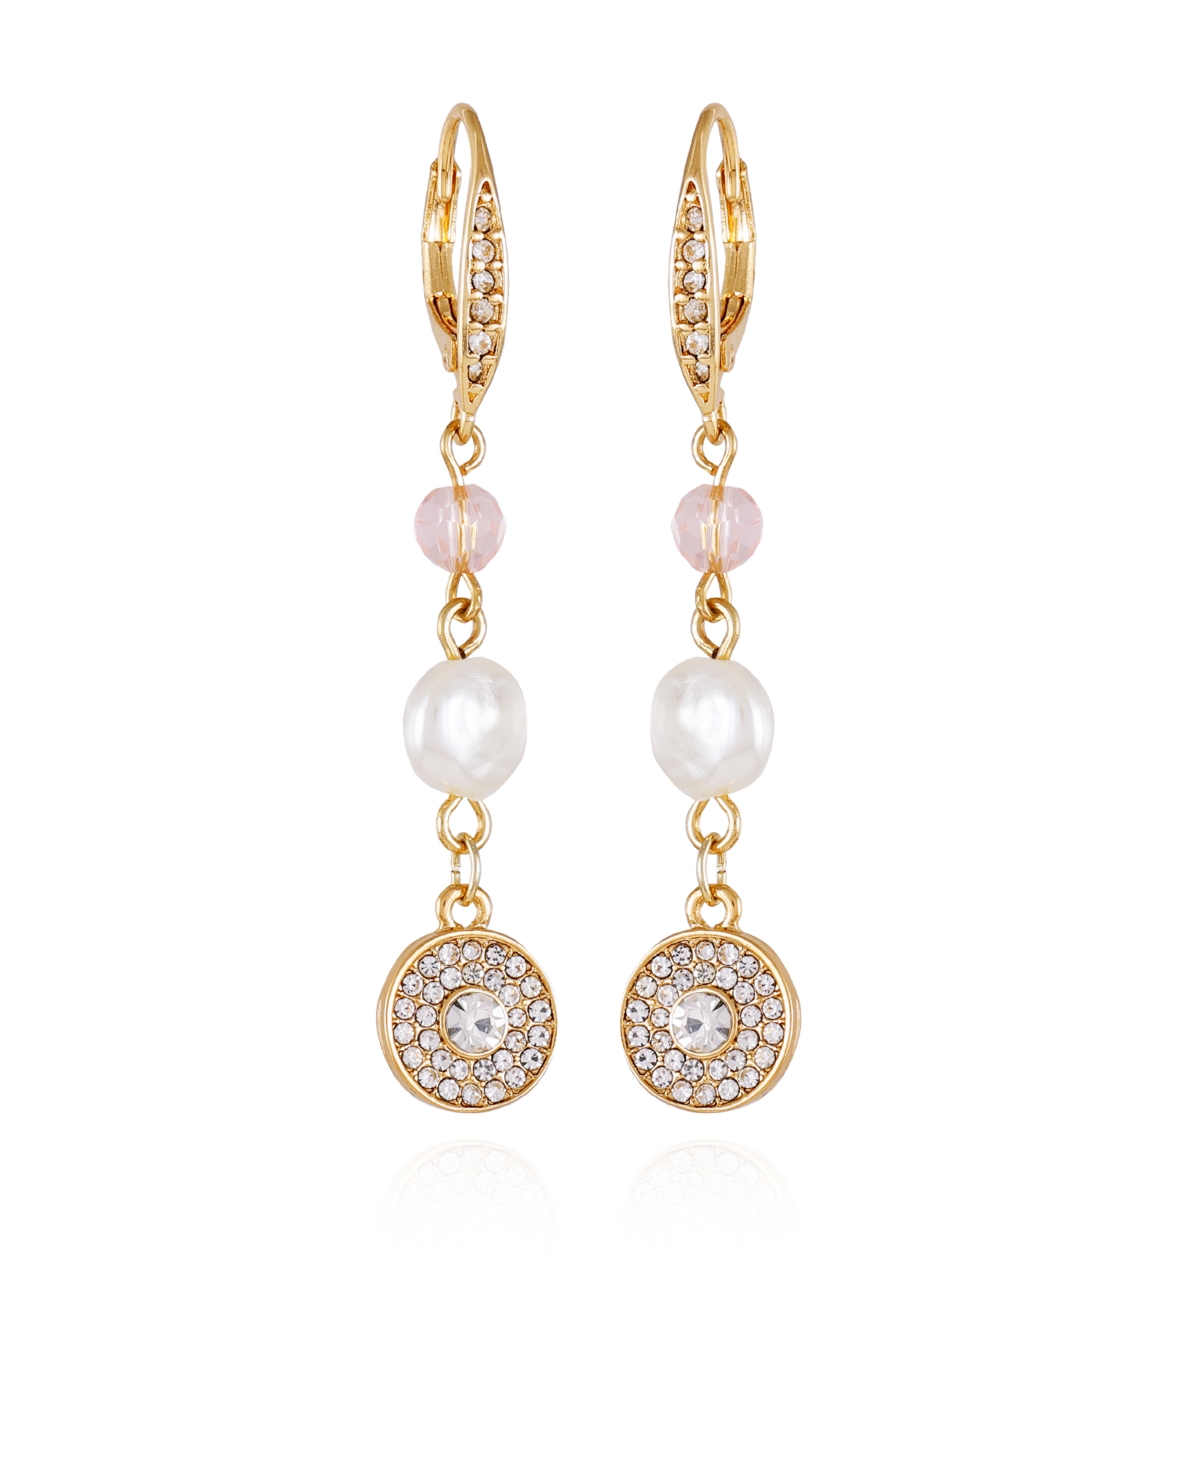 Gold-Tone Lilac Violet Glass Stone and Imitation Pearl Drop Earrings - Gold